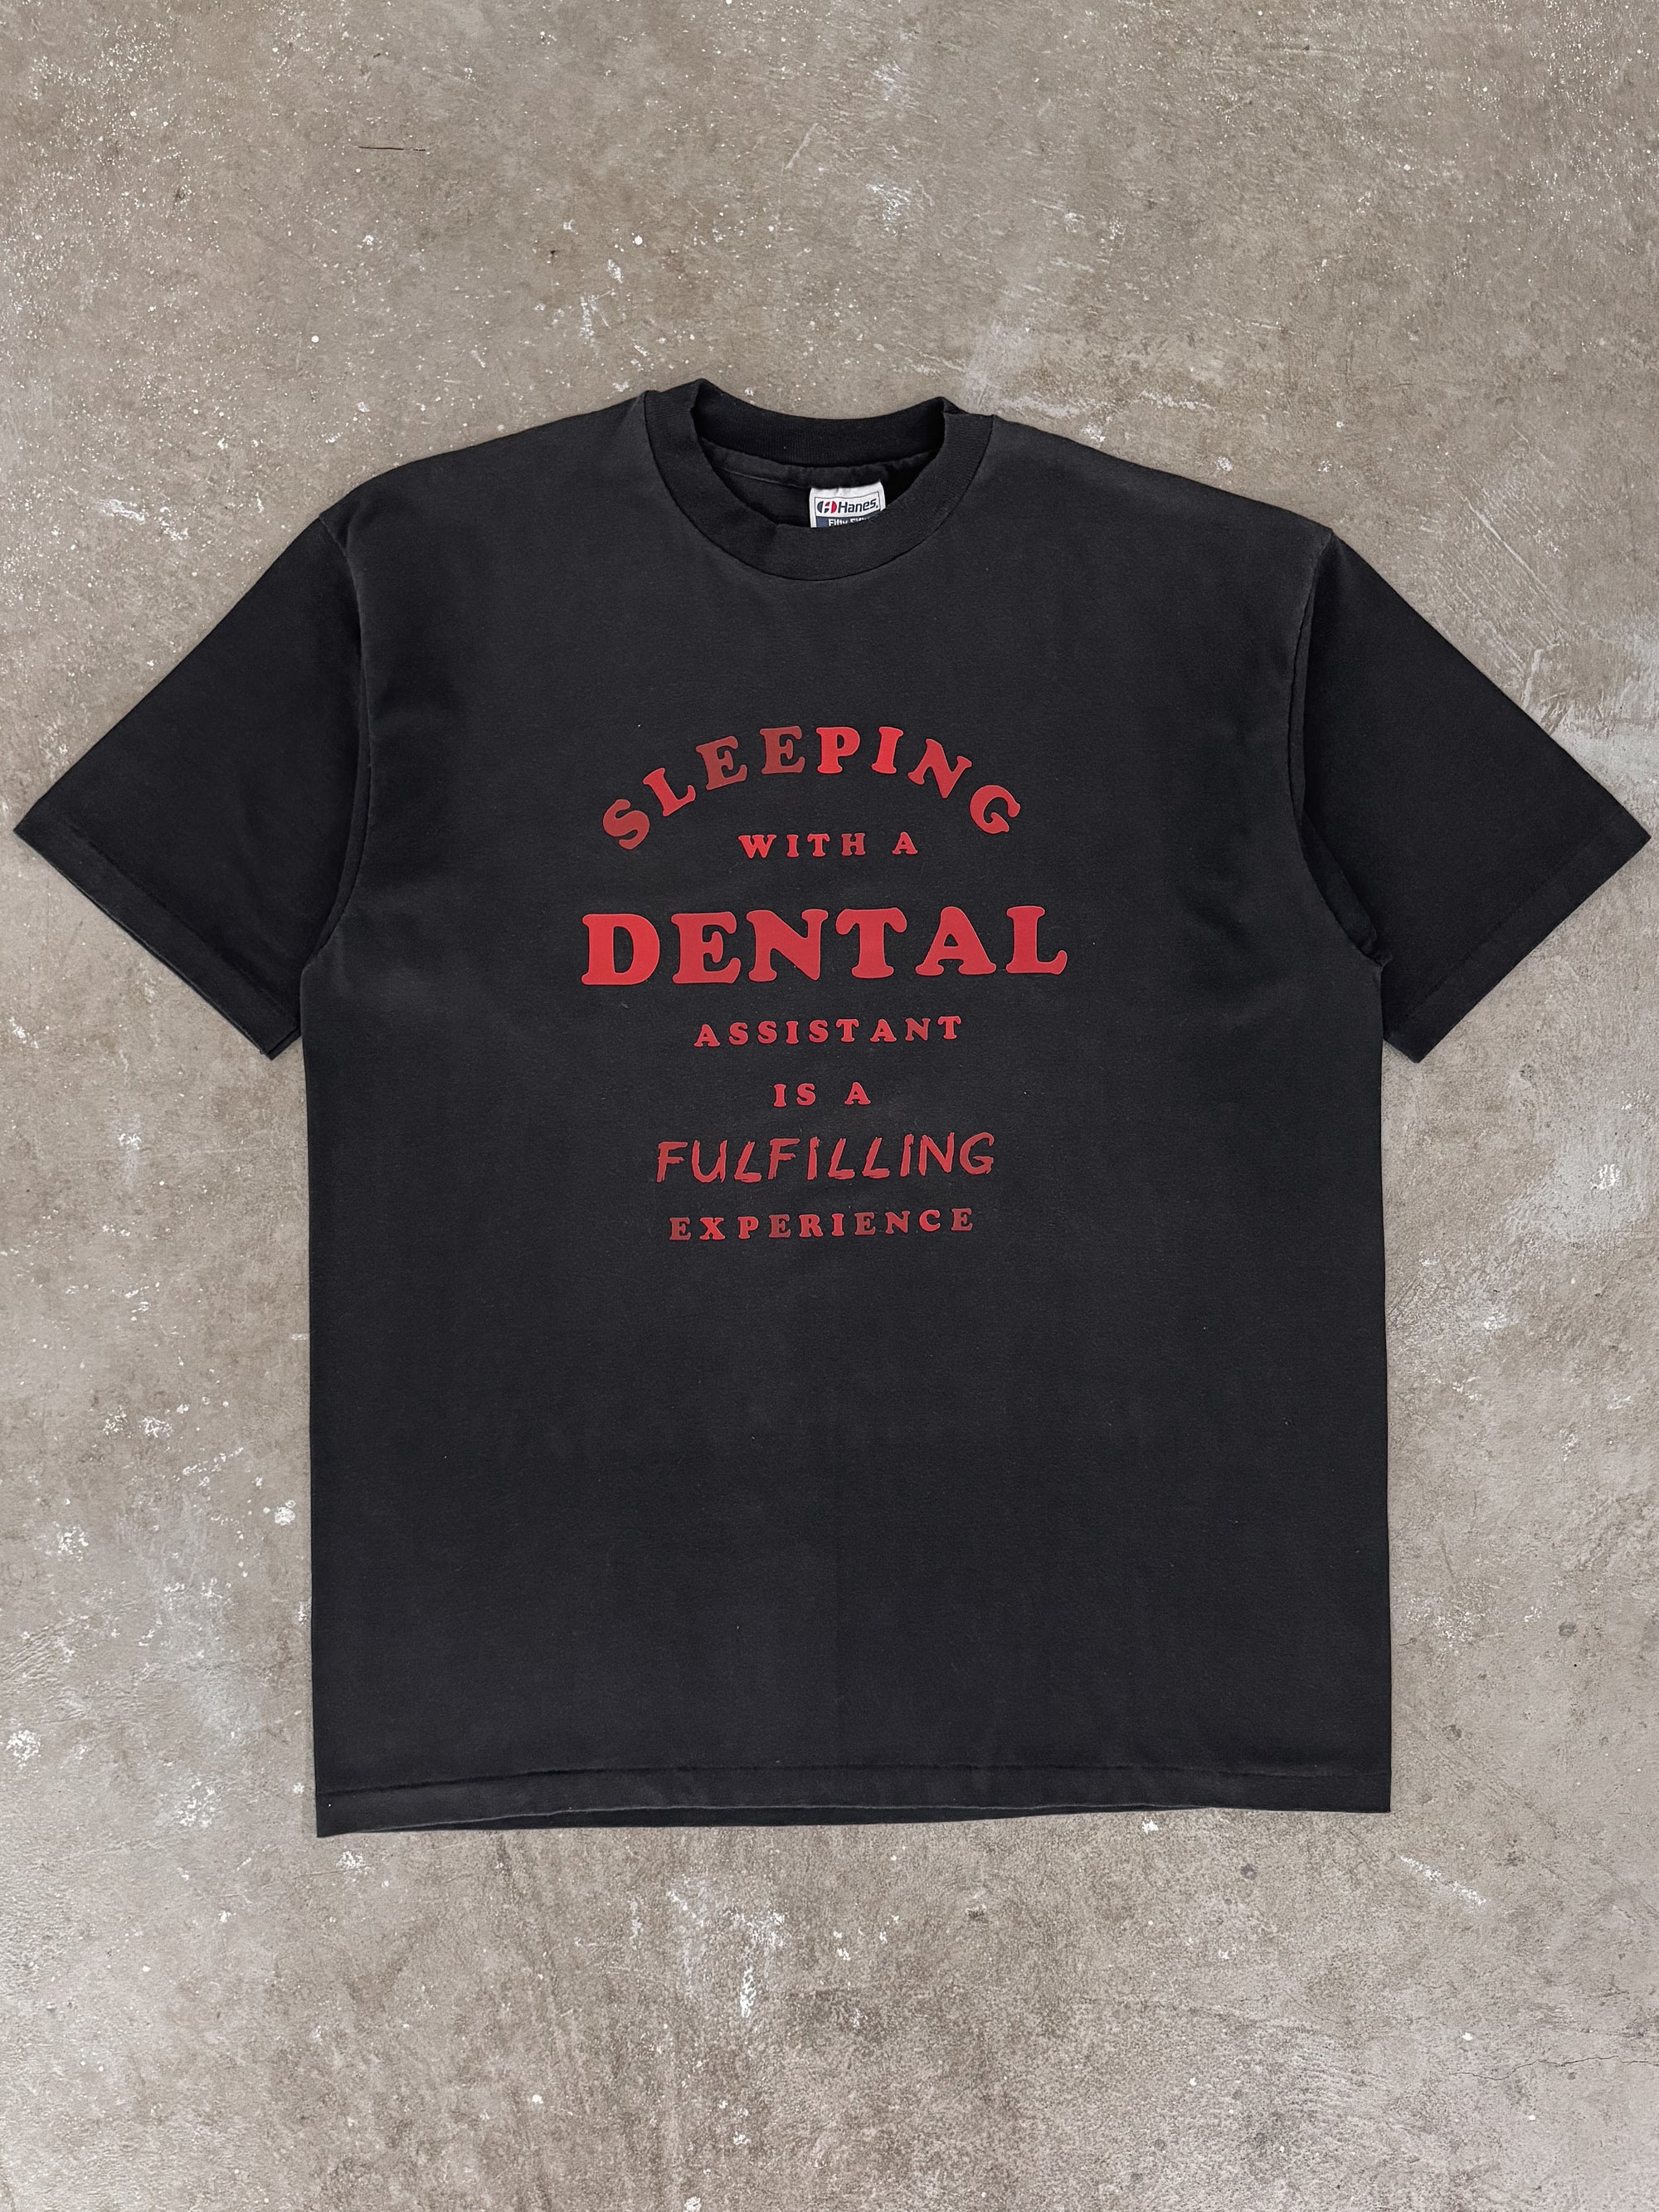 1990s “Sleeping With A Dental Assistant…” Single Stitched Tee (L/XL)